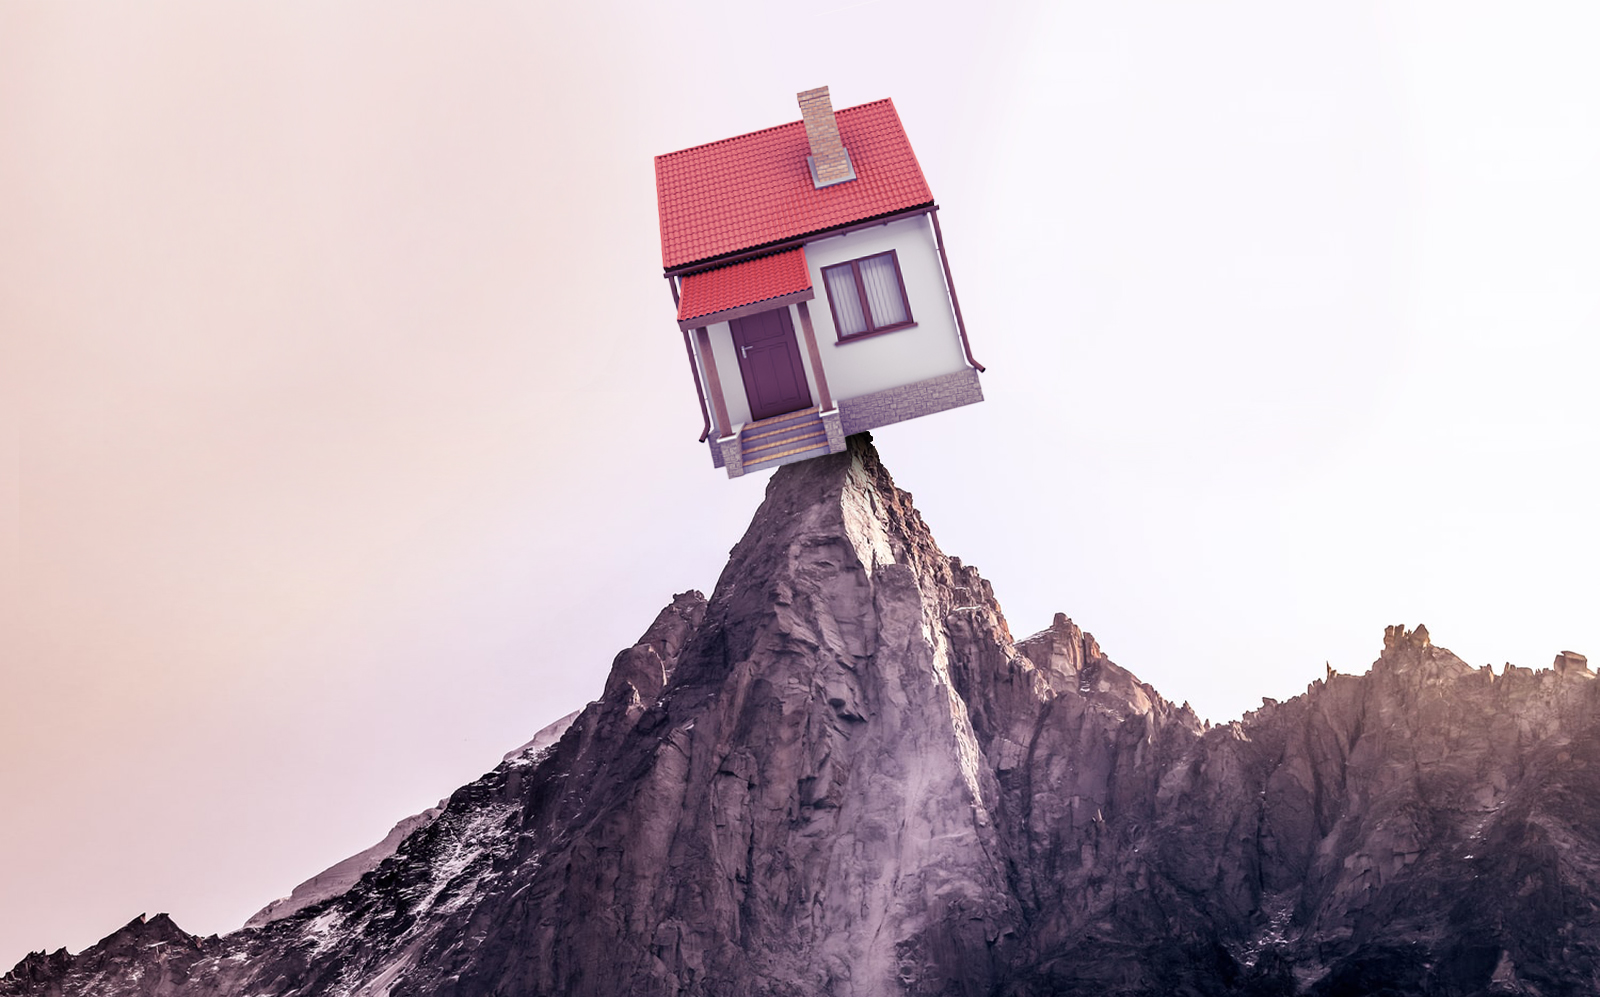 Home prices surpass 2006 peak levels. (Getty, Unsplash, Photo Illustration by Alison Bushor for The Real Deal)